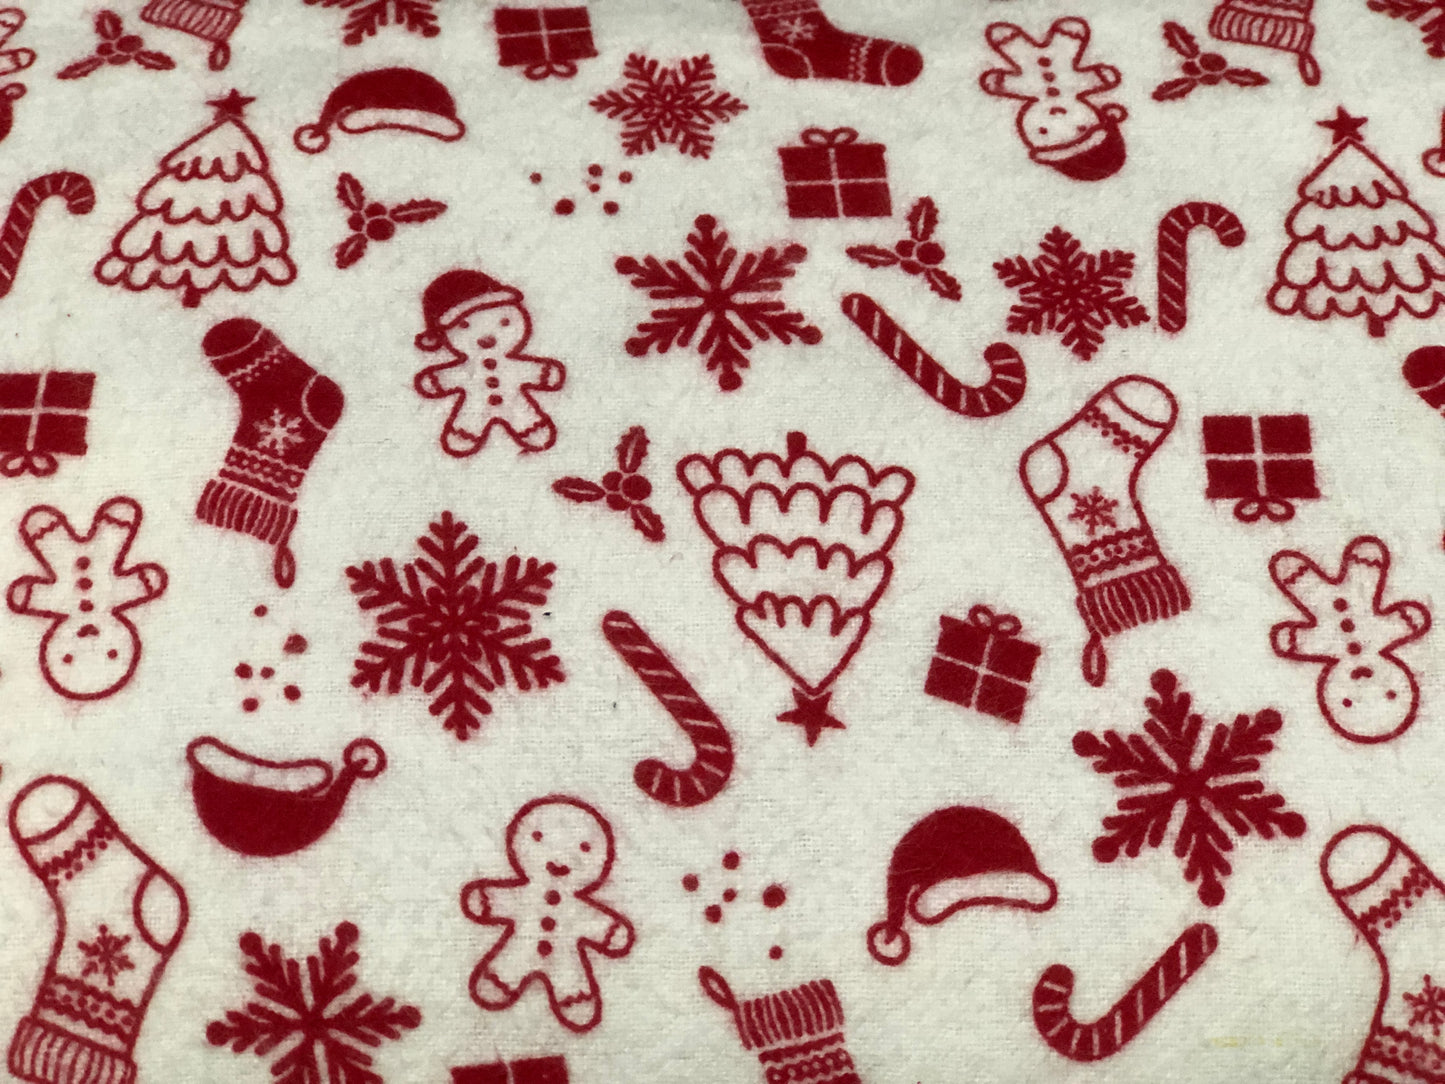 Flannel 2582- White with Christmas items